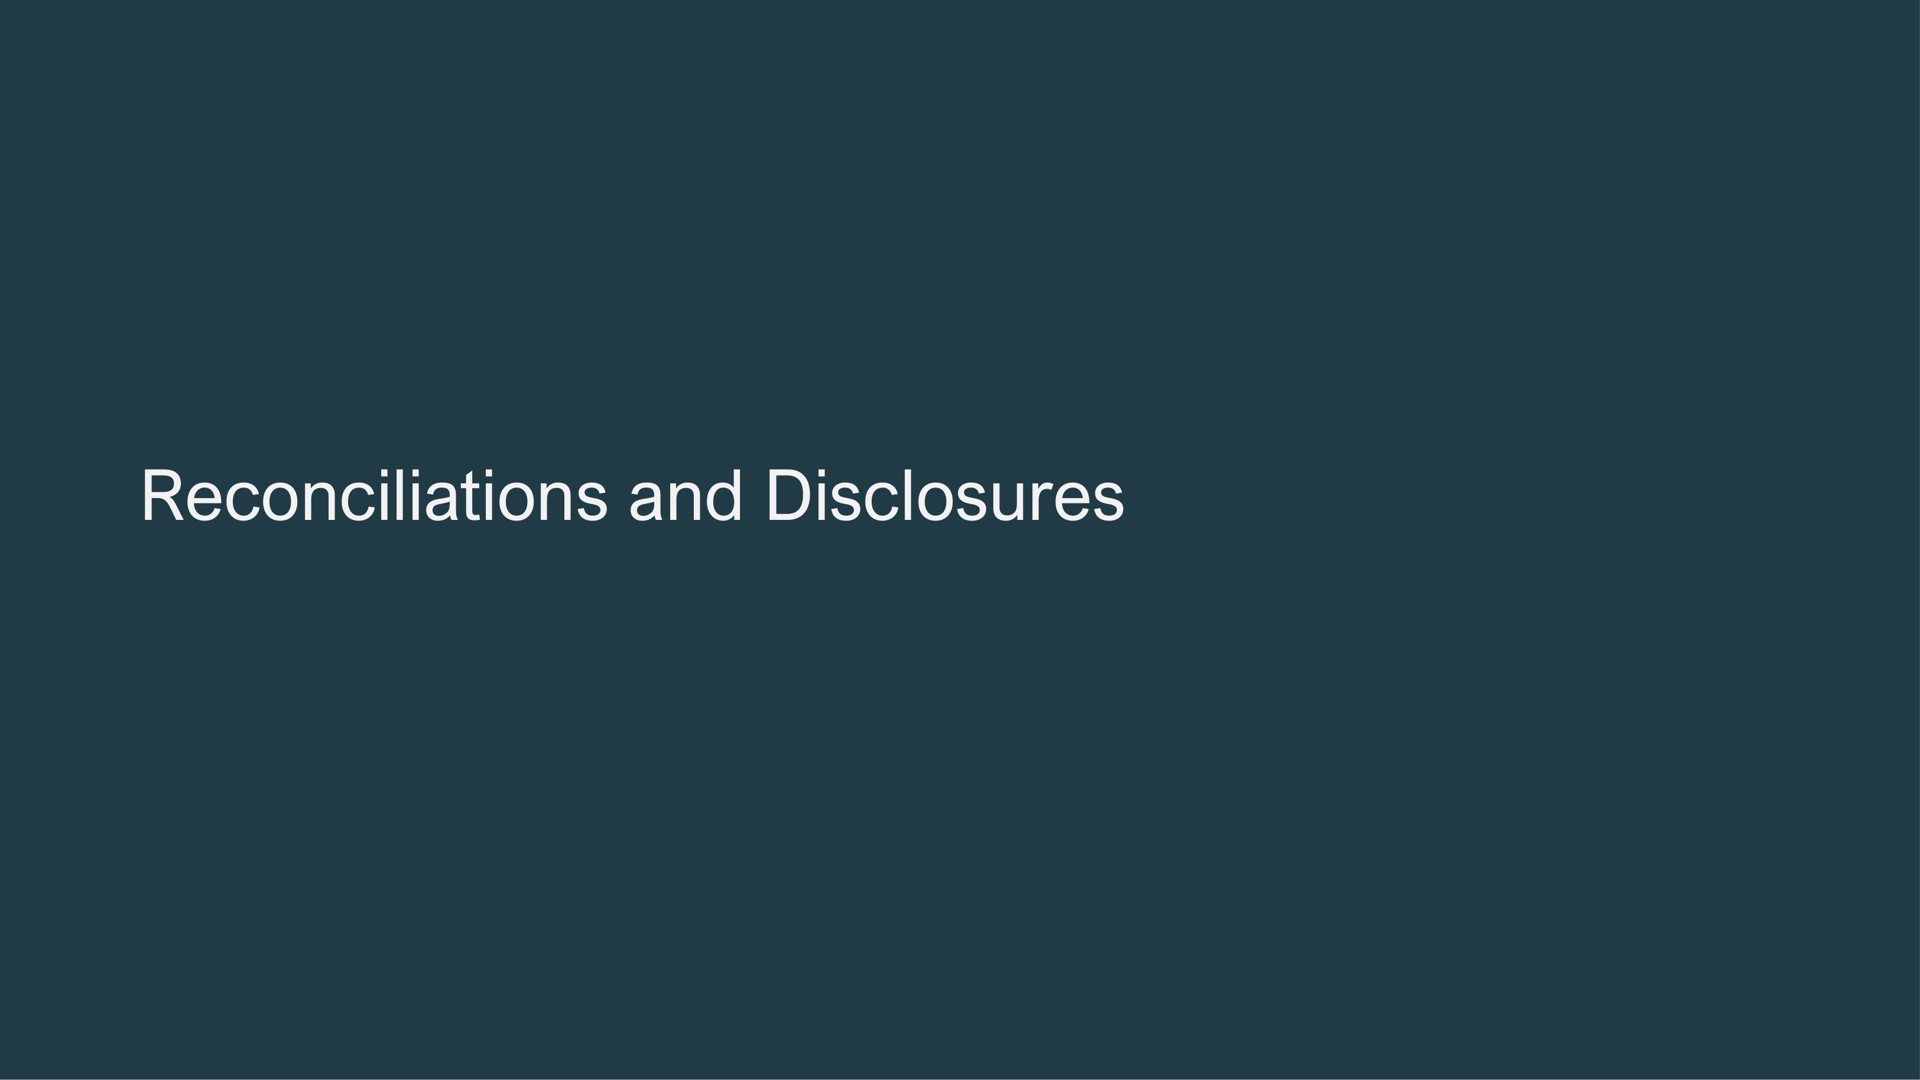 reconciliations and disclosures | Apollo Global Management